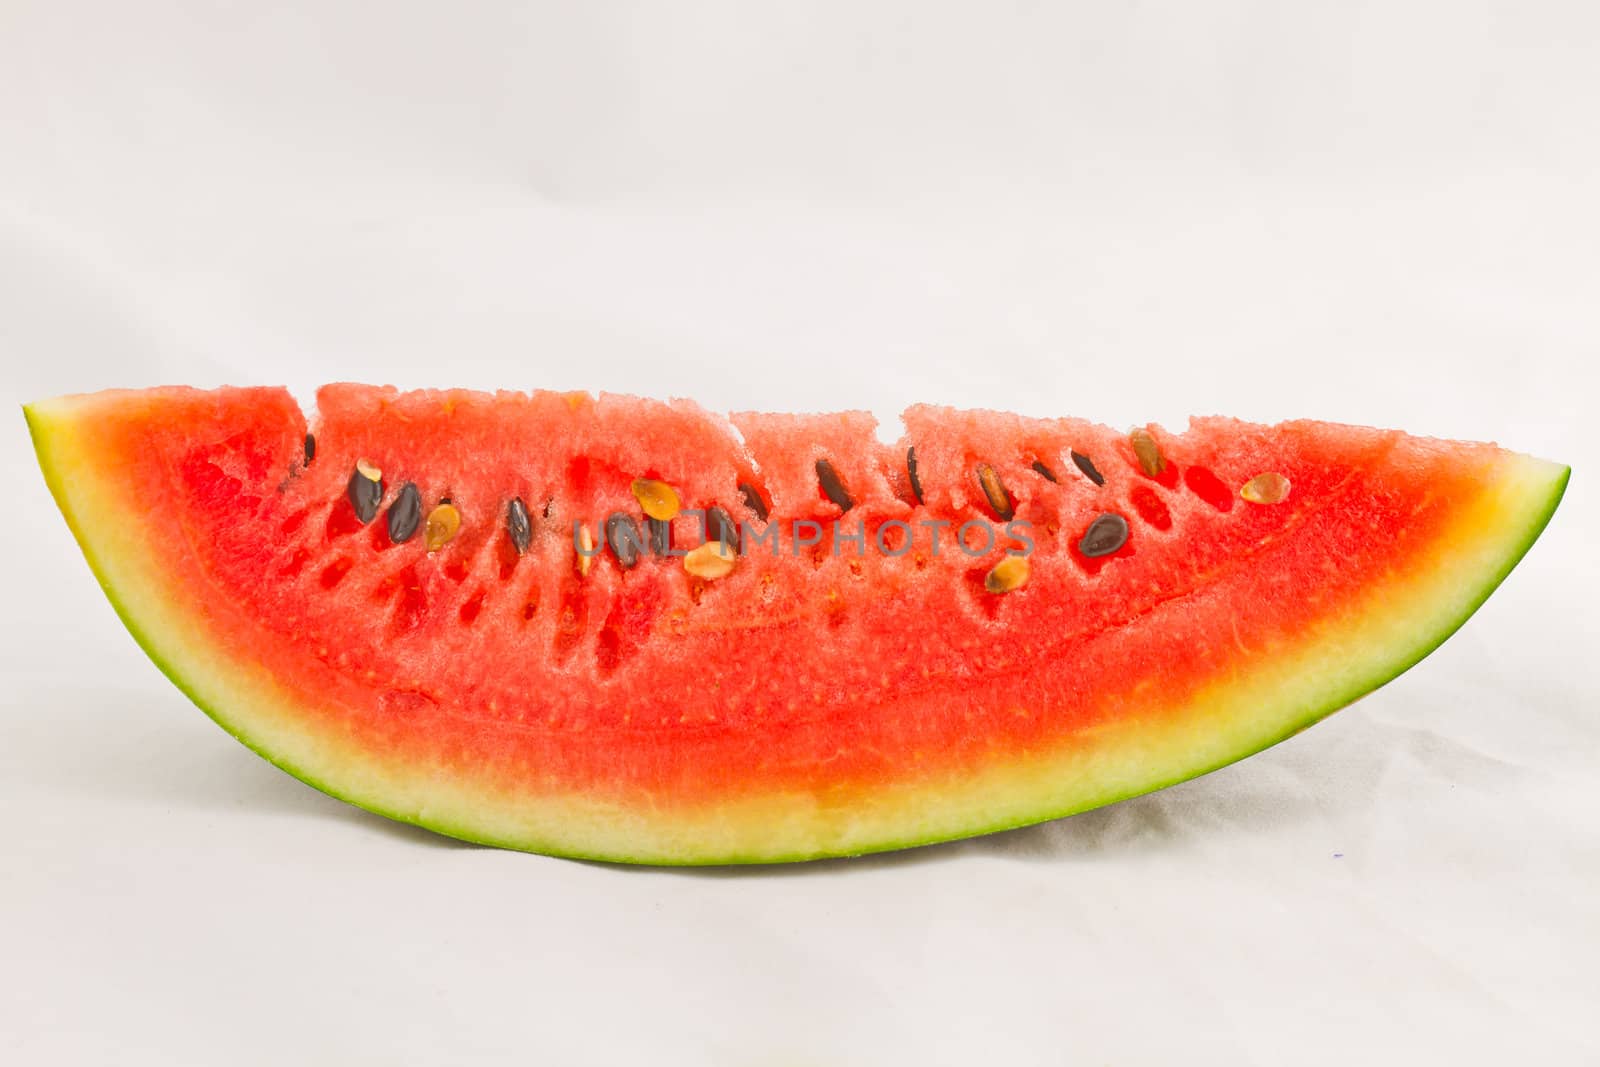 slice of watermelon, isolated on white